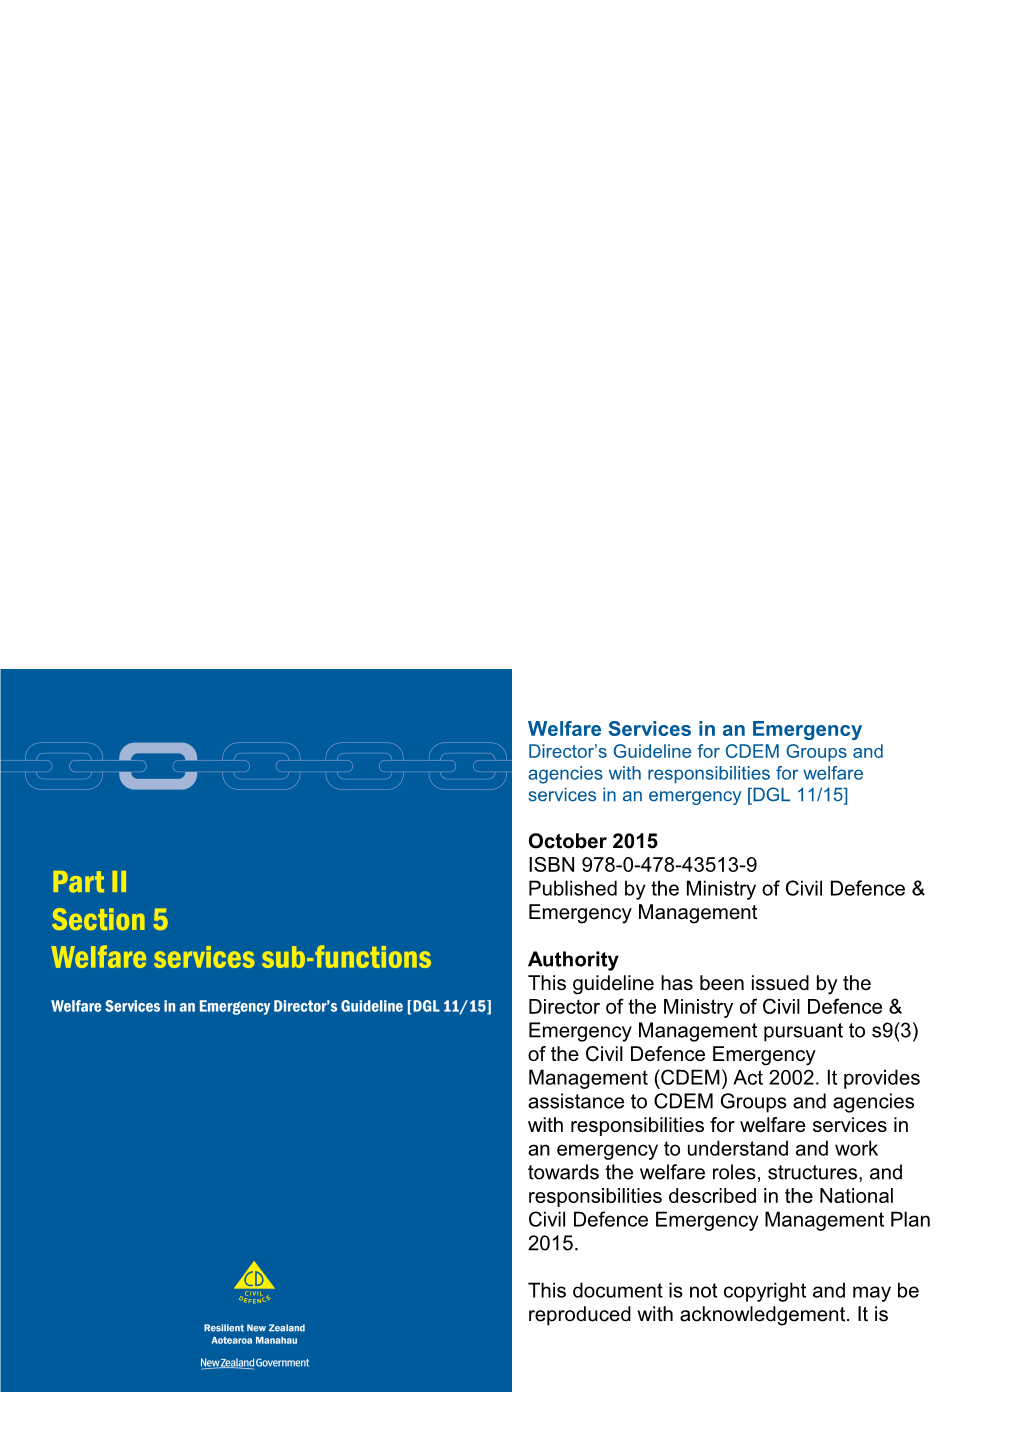 Welfare Services in an Emergency - Part II Section 5 Welfare Services Sub-Functions - November